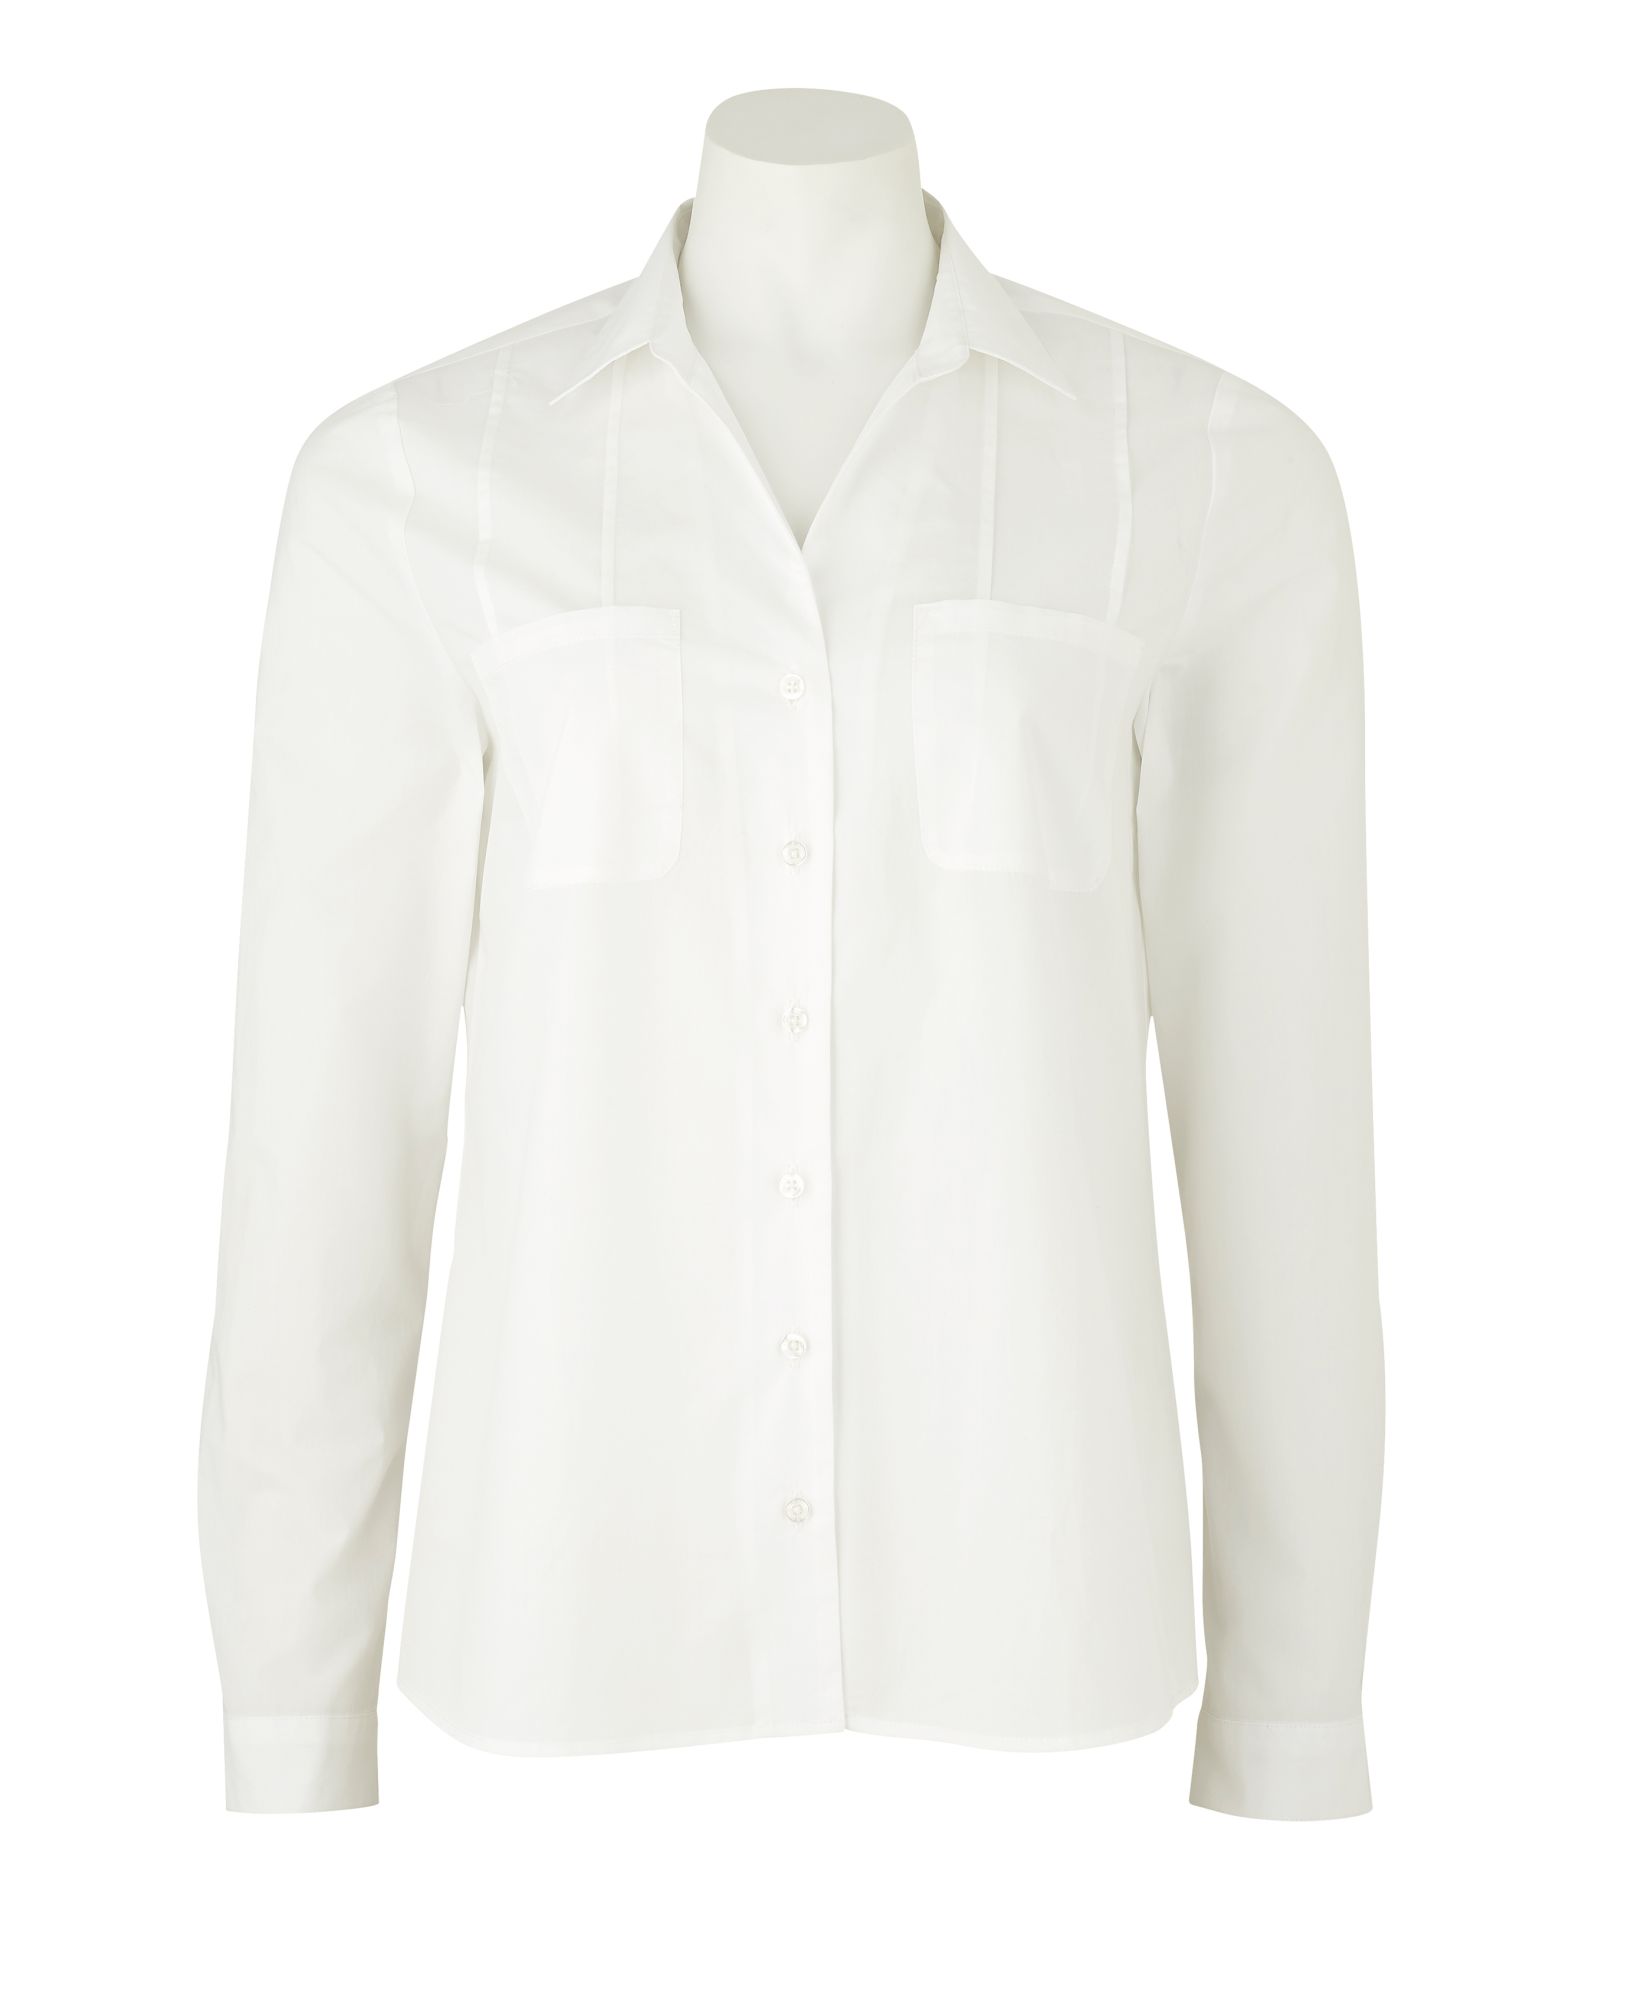 White Semi-Fitted Women's Shirt With Pin-Tuck Detail 14